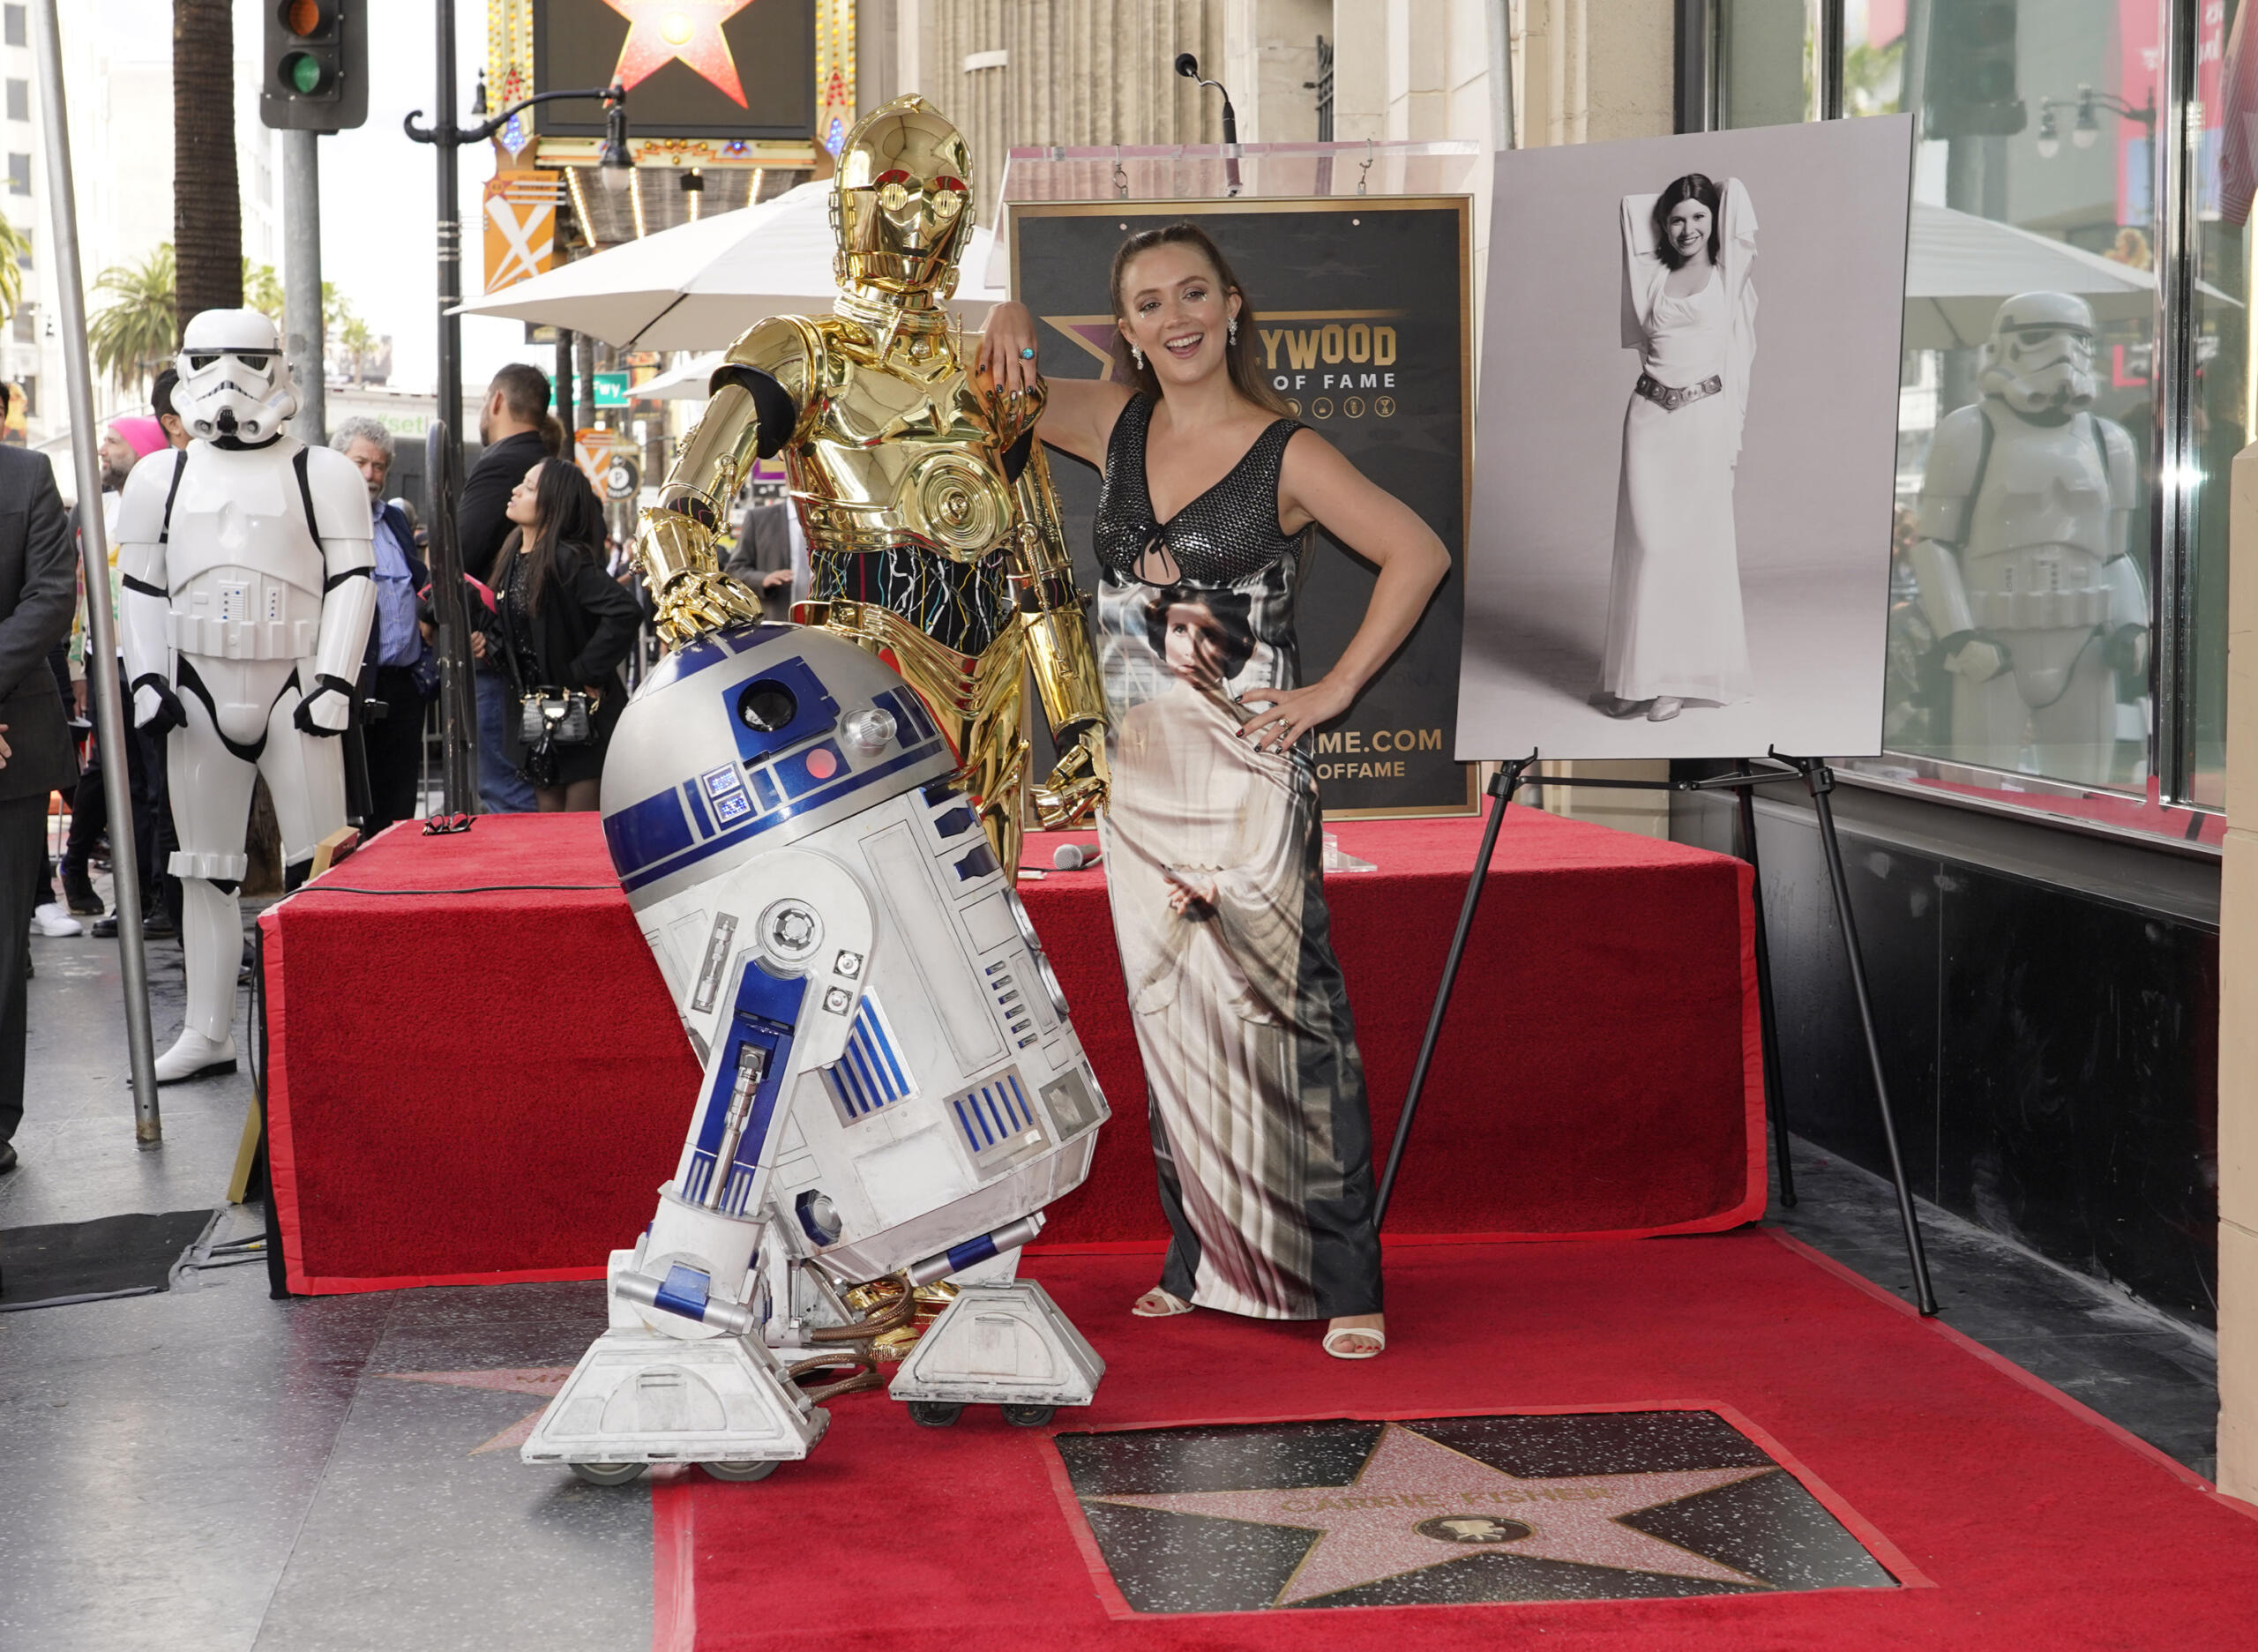 Billie Lourd, daughter of the late actress Carrie Fisher, pictured at right, poses with Fisher's star on the Hollywood Walk of Fame alongside "Star Wars" characters C-3PO and R2-D2, during a posthumous ceremony in Los Angeles on Thursday, May 4, 2023. The day is also known as May the Fourth in tribute to the "Star Wars" films in which Fisher played Princess Leia.